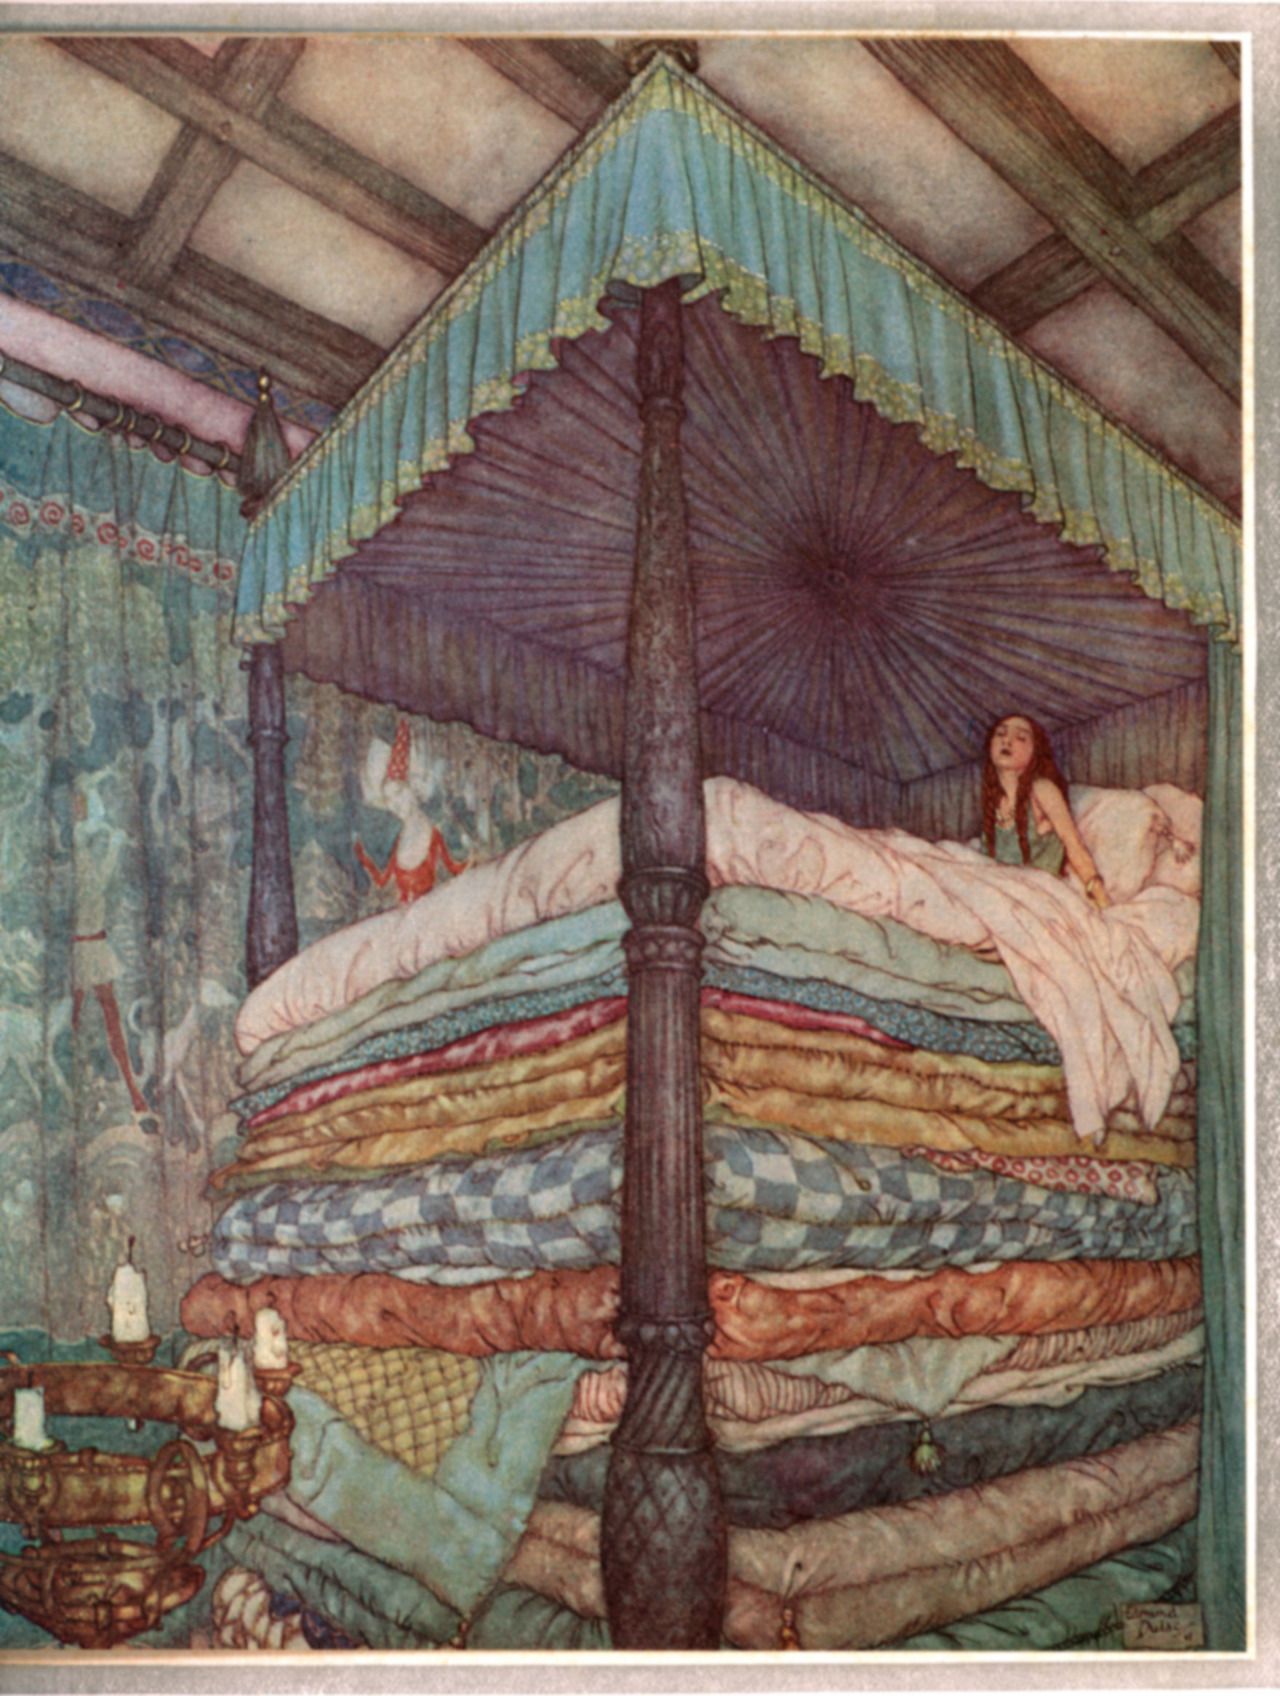 The Princess and the Pea (1911) by Edmund Dulac